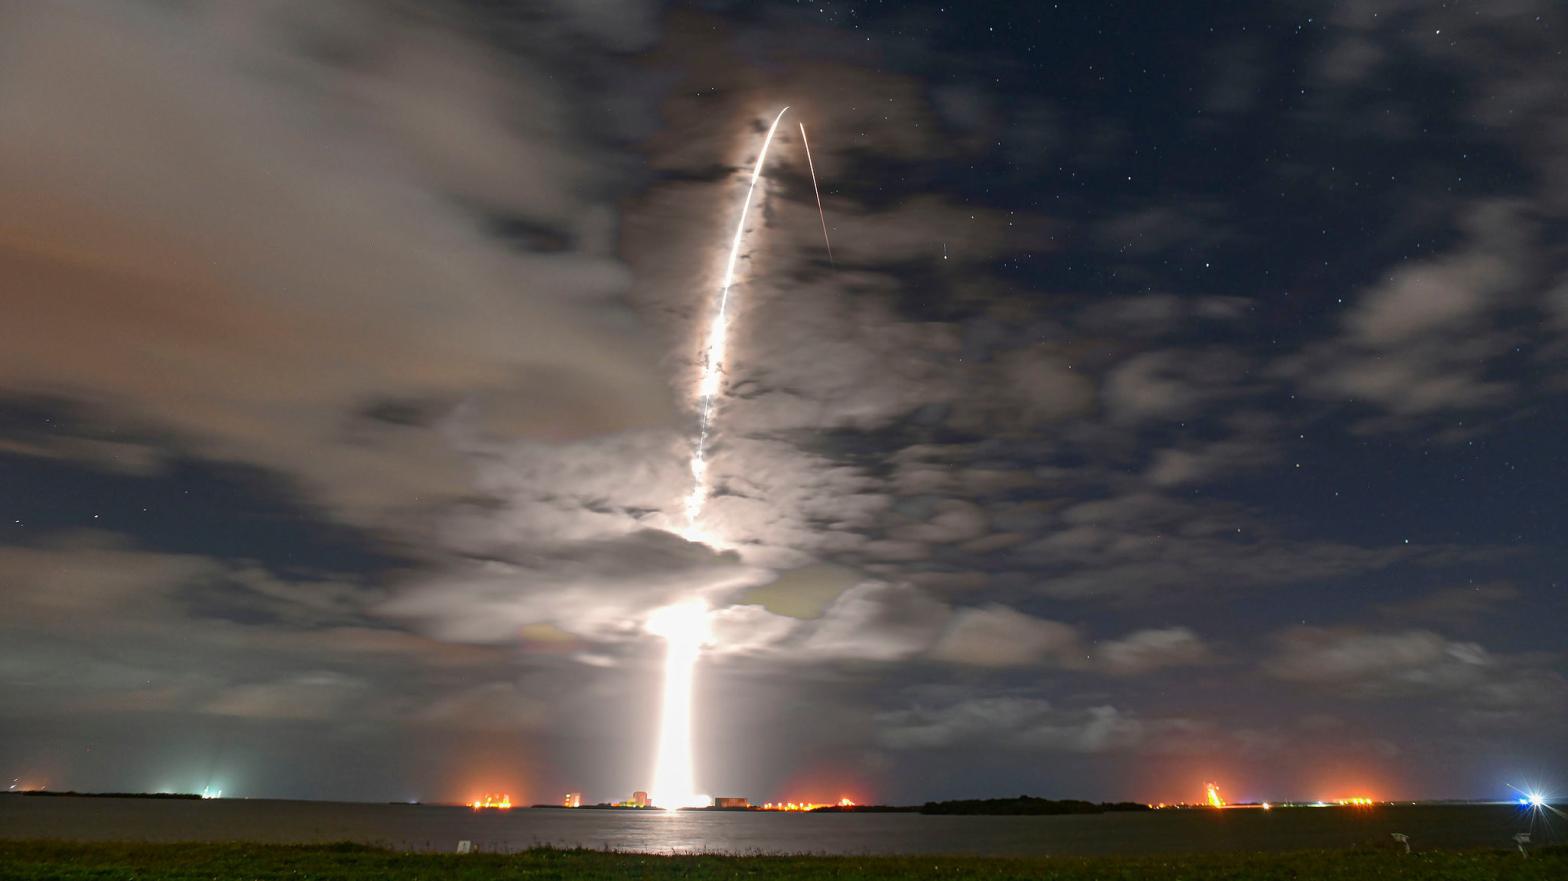 Launch of SpaceX Starlink satellites on November 24, 2020. (Image: SpaceX)